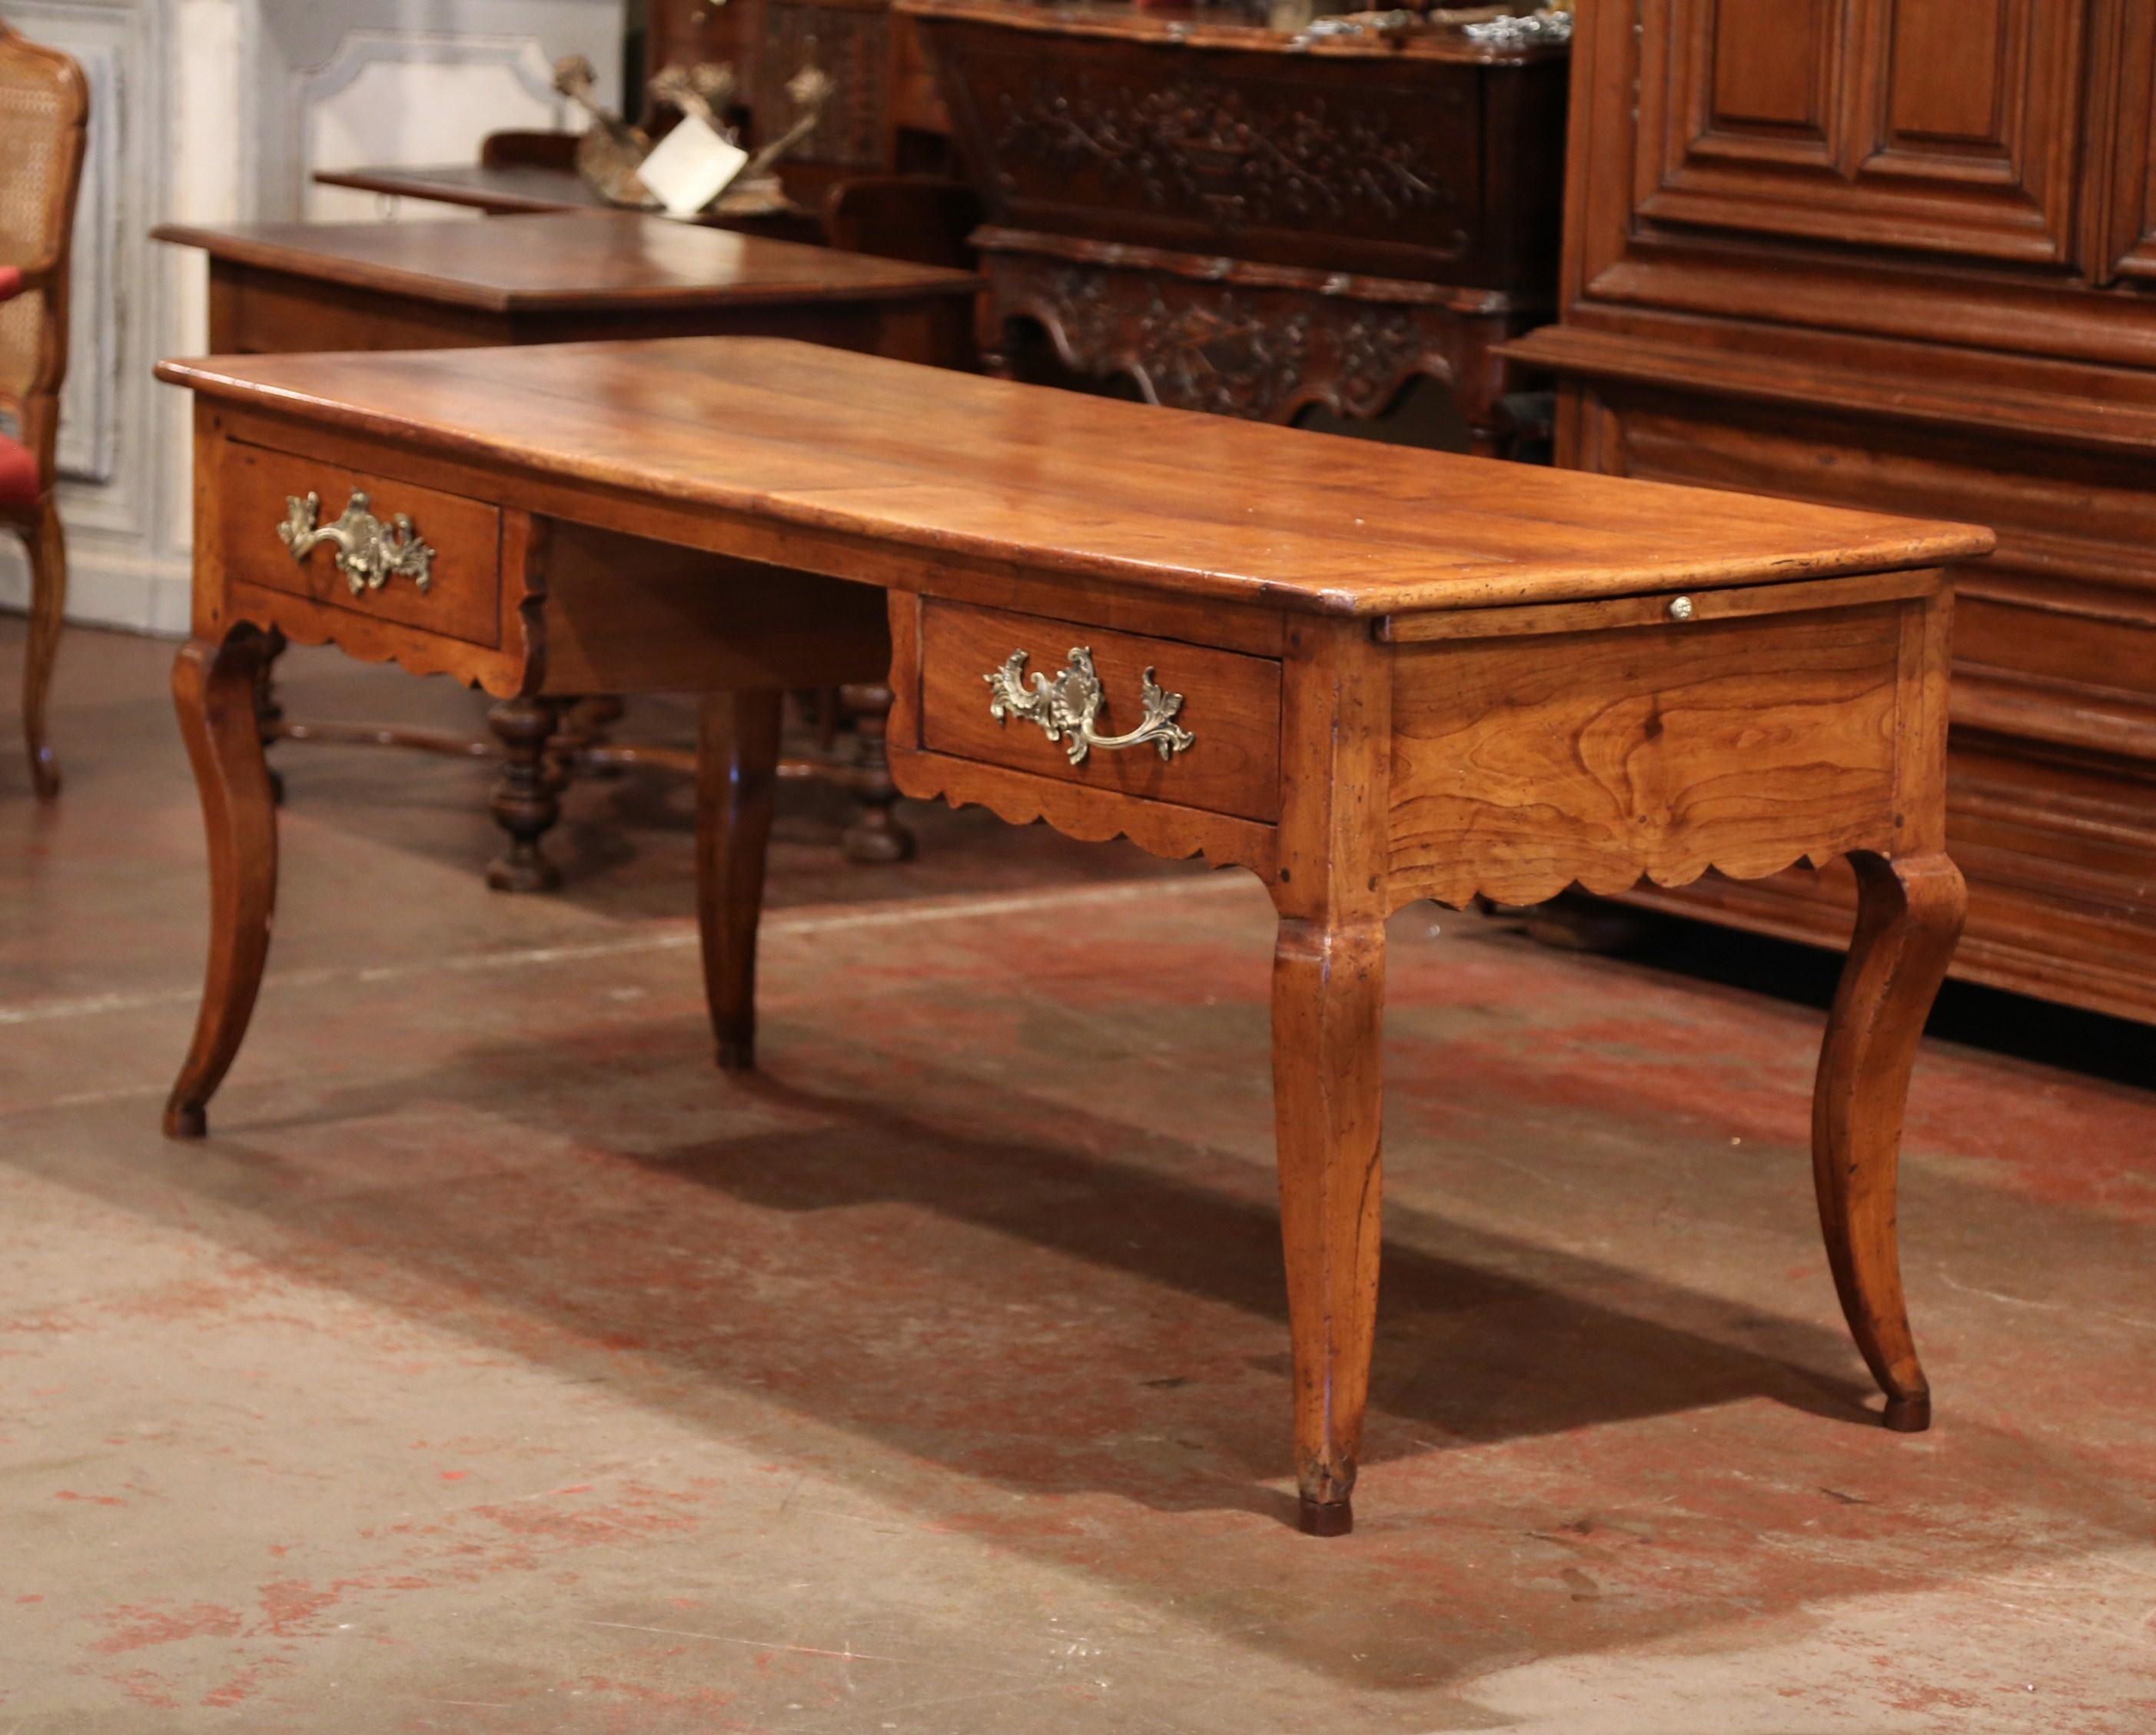 This elegant antique fruitwood desk was created in the Poitou region of France, circa 1790. Made of wild cherry timber, the large writing table sits on four cabriole legs over a decorative scalloped apron. The front has a wide opening with plenty of